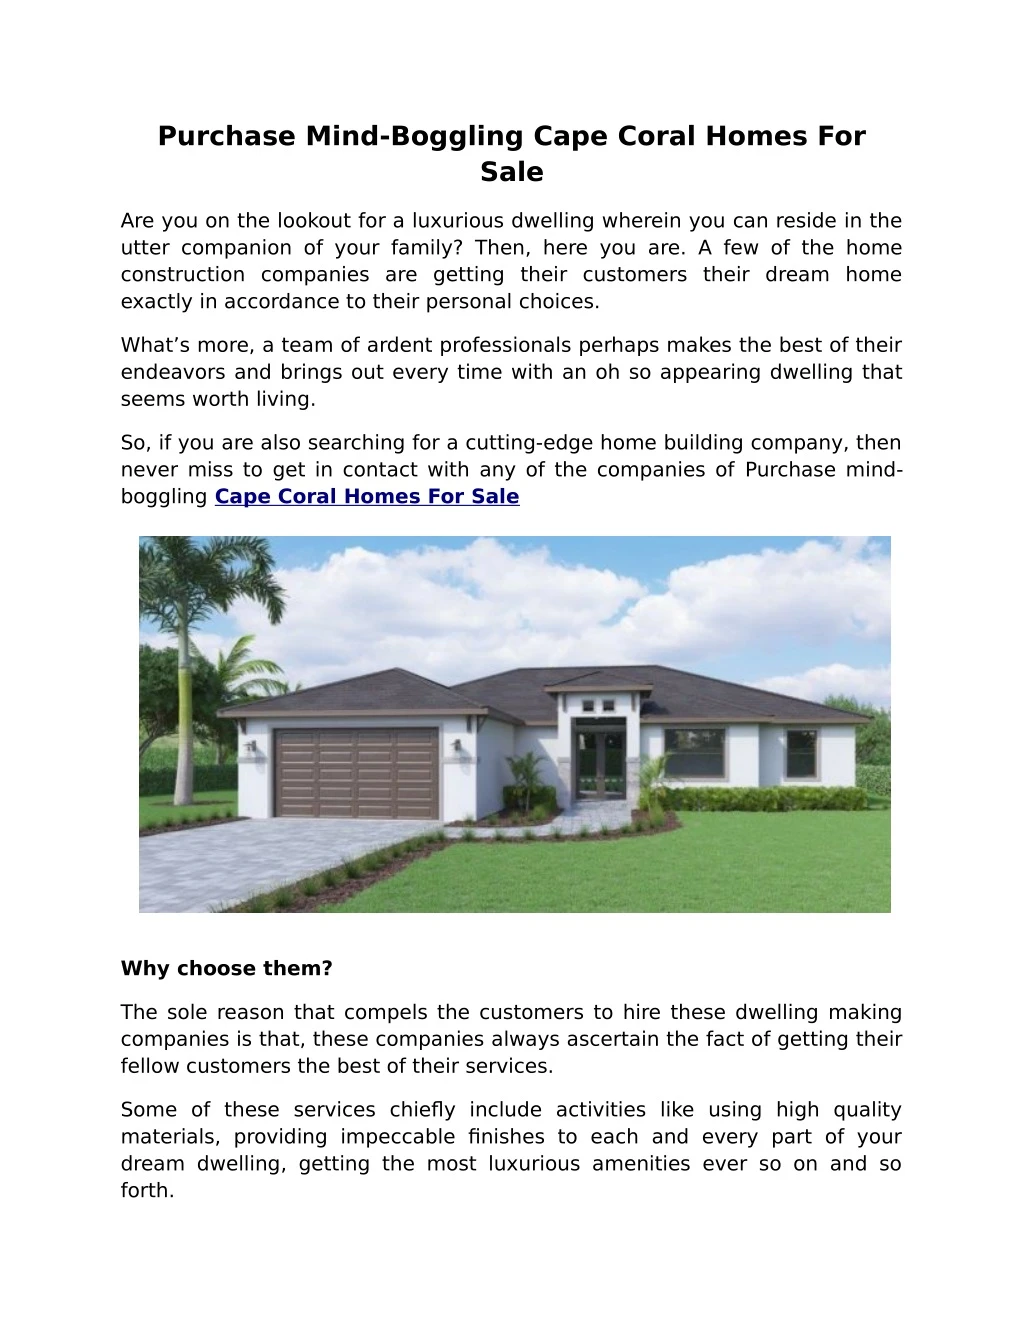 purchase mind boggling cape coral homes for sale